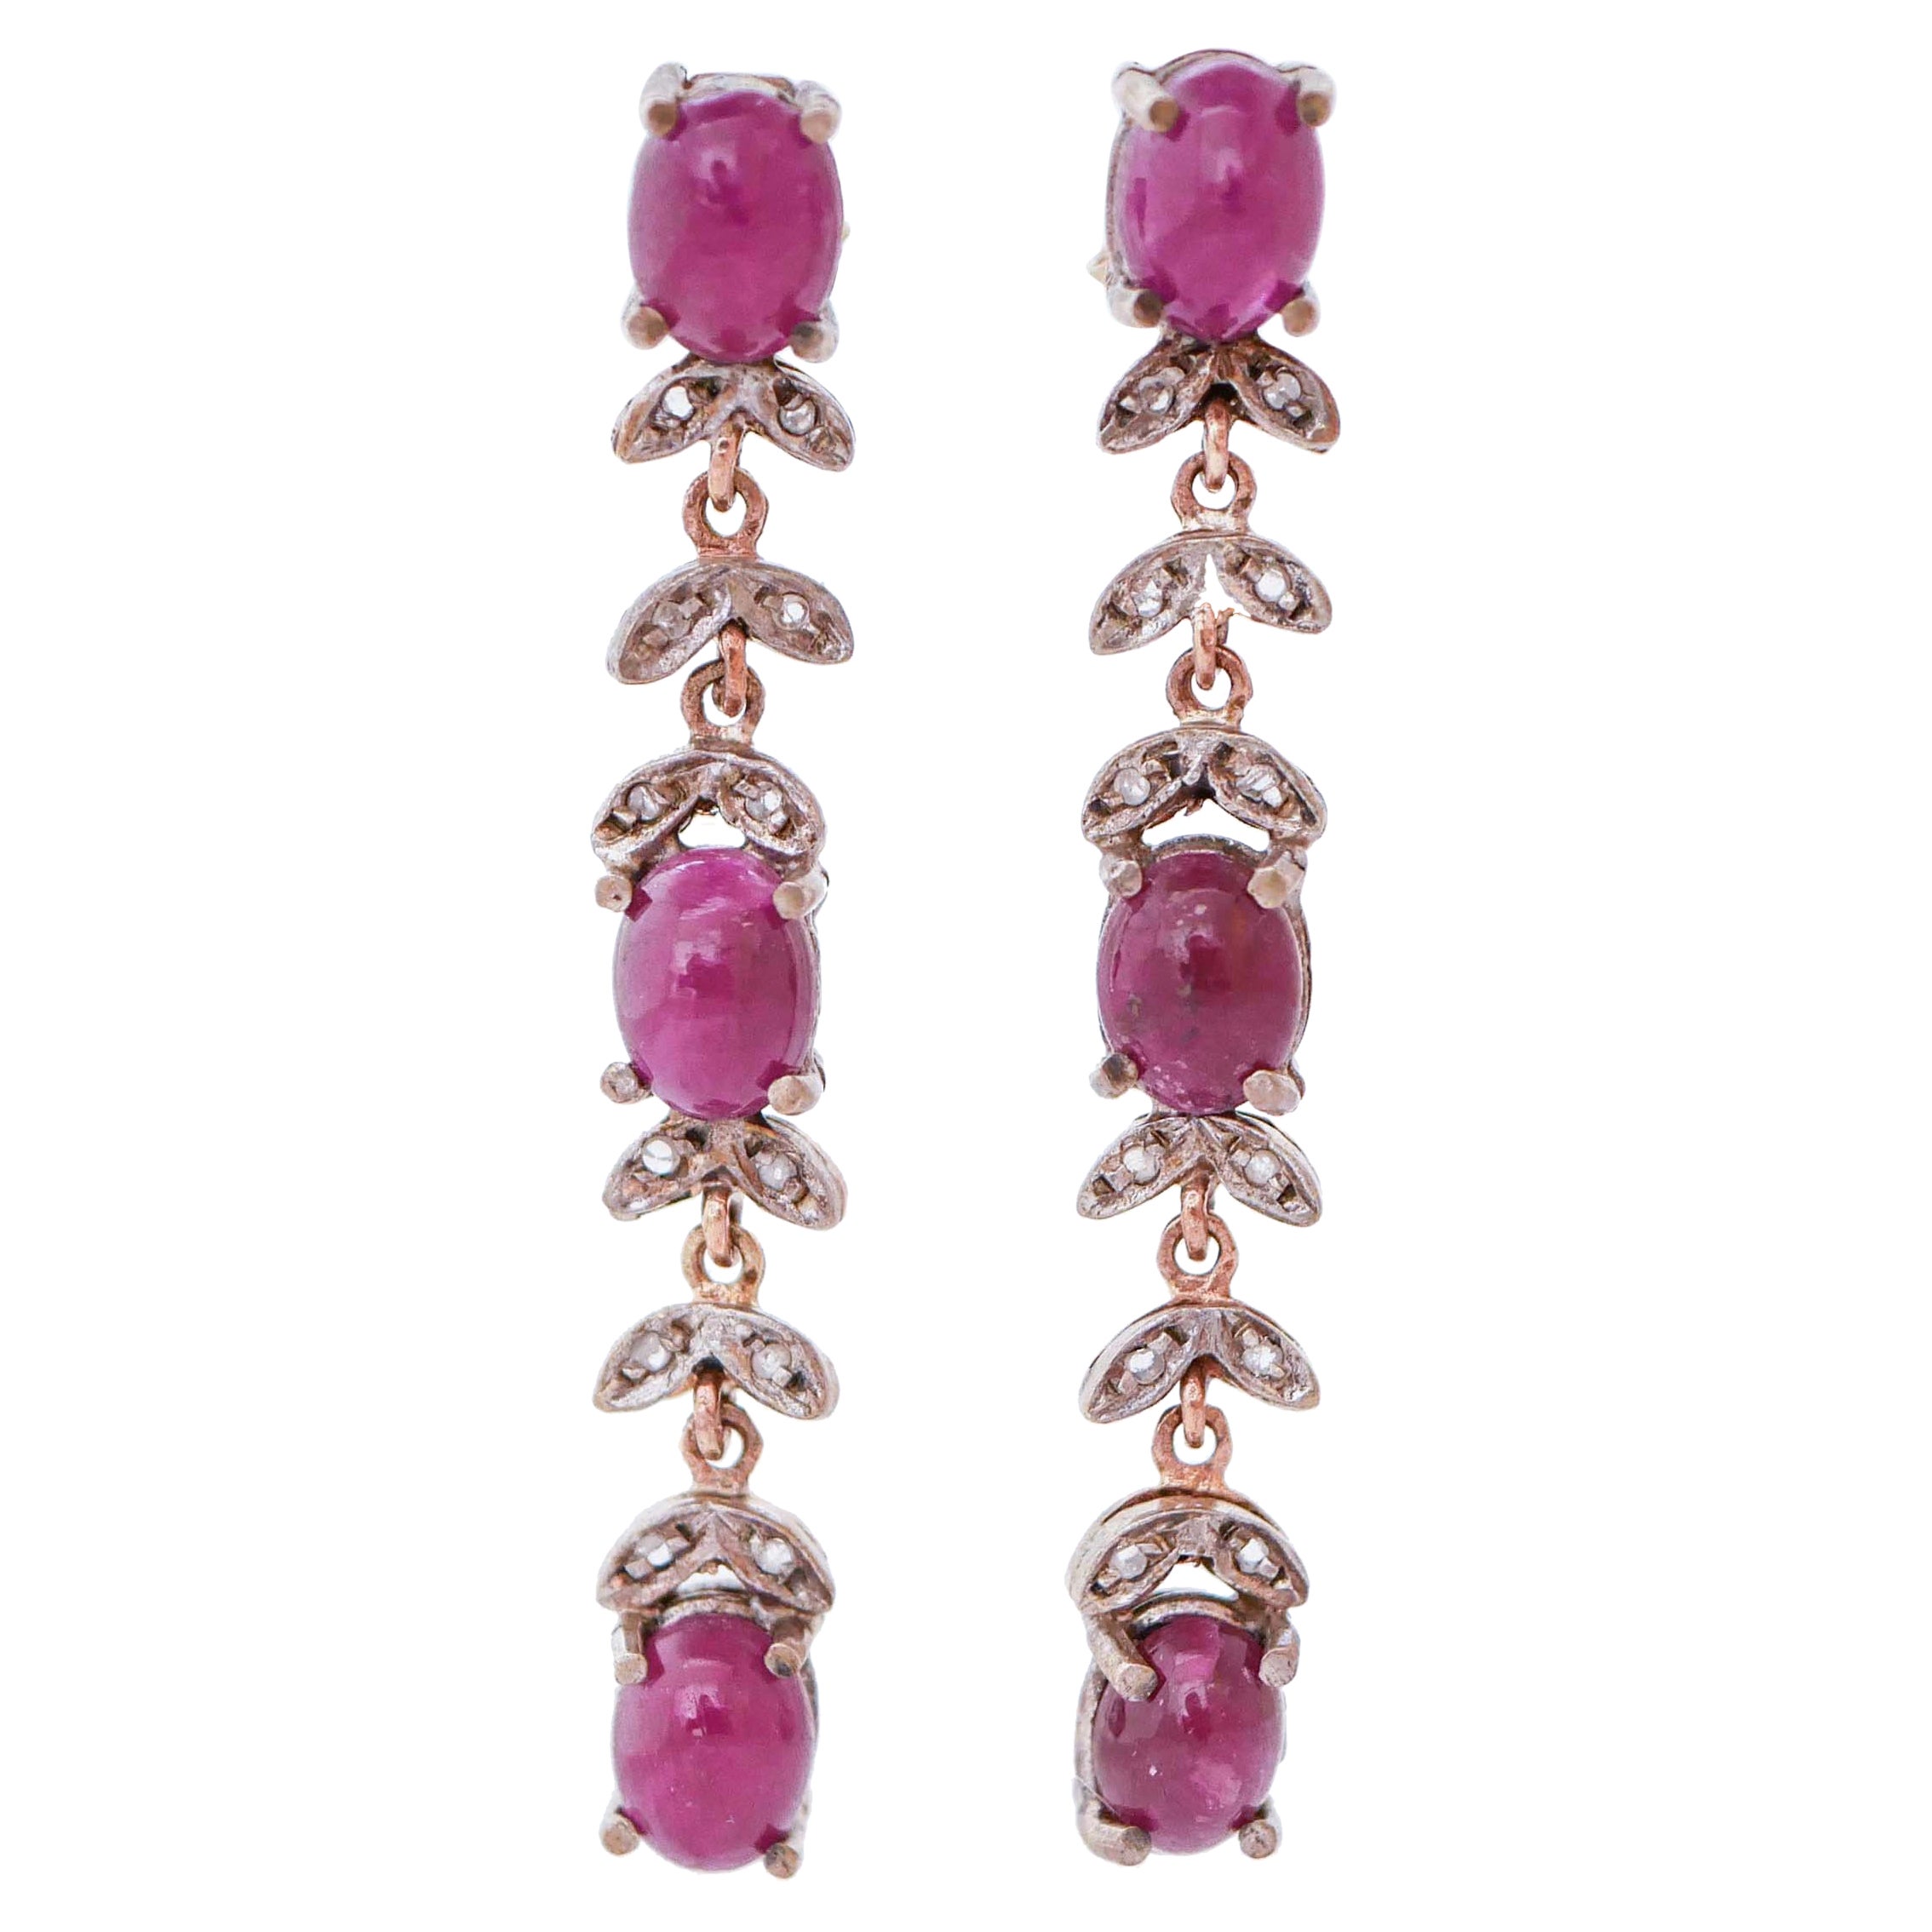 Rubies , Diamonds, Rose Gold and Silver Dangle Earrings